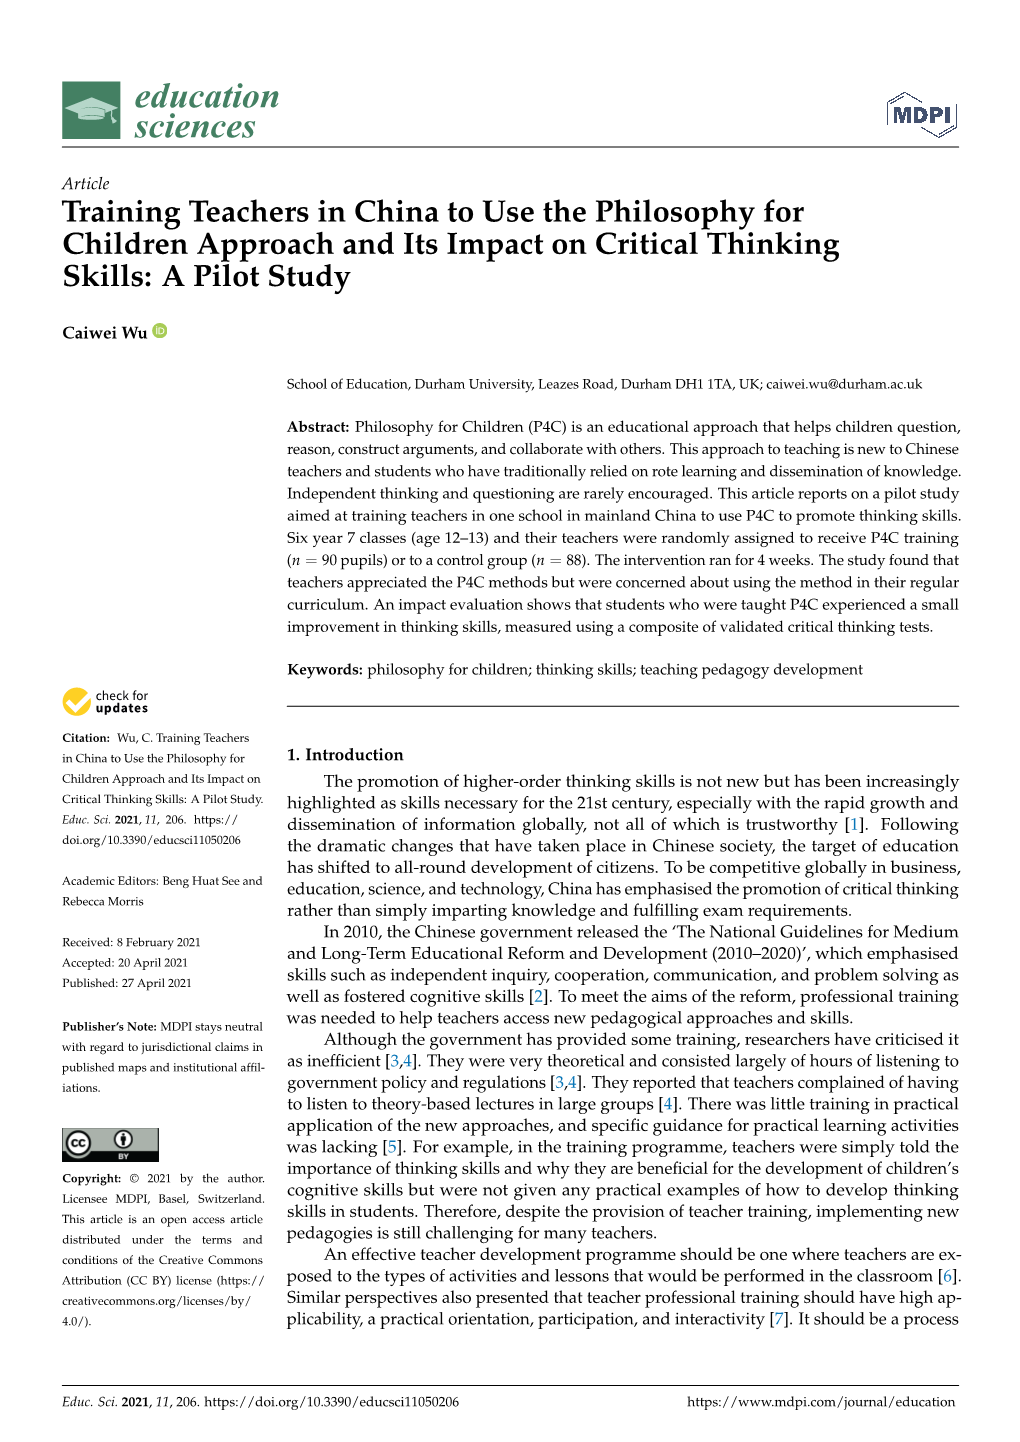 Training Teachers in China to Use the Philosophy for Children Approach and Its Impact on Critical Thinking Skills: a Pilot Study